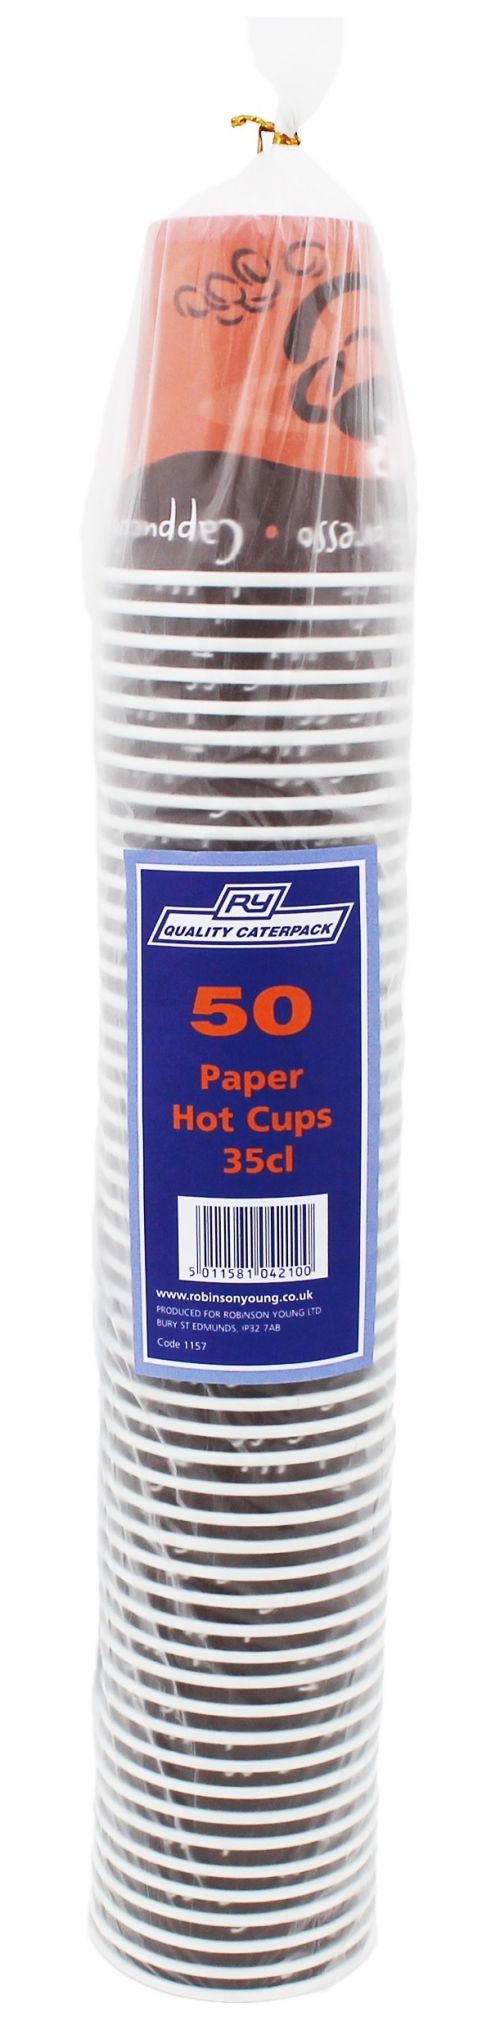 Caterpack Hot Drink Paper Cup 12oz (Pack 50) - RY01157